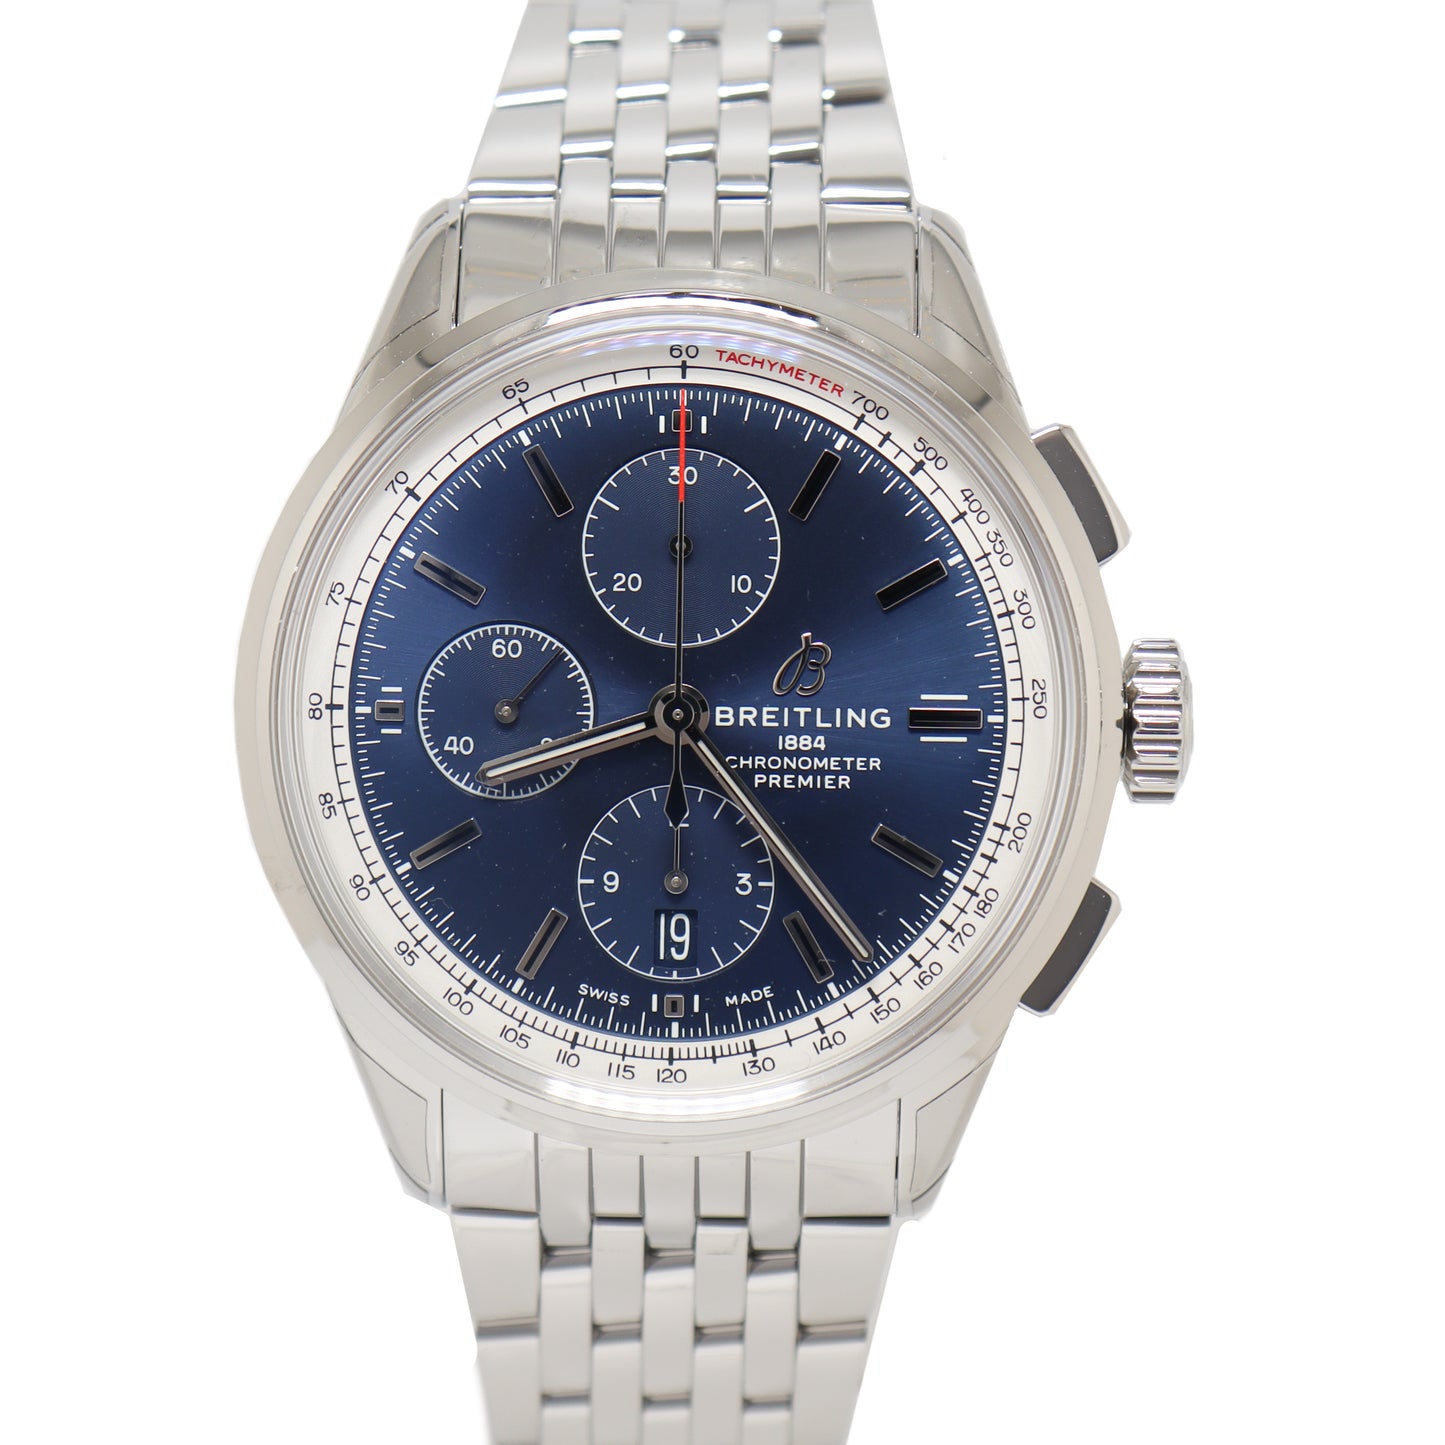 Load image into Gallery viewer, Breitling Premier Stainless Steel 42mm Blue Chronograph Dial Watch Reference# A13315 - Happy Jewelers Fine Jewelry Lifetime Warranty
